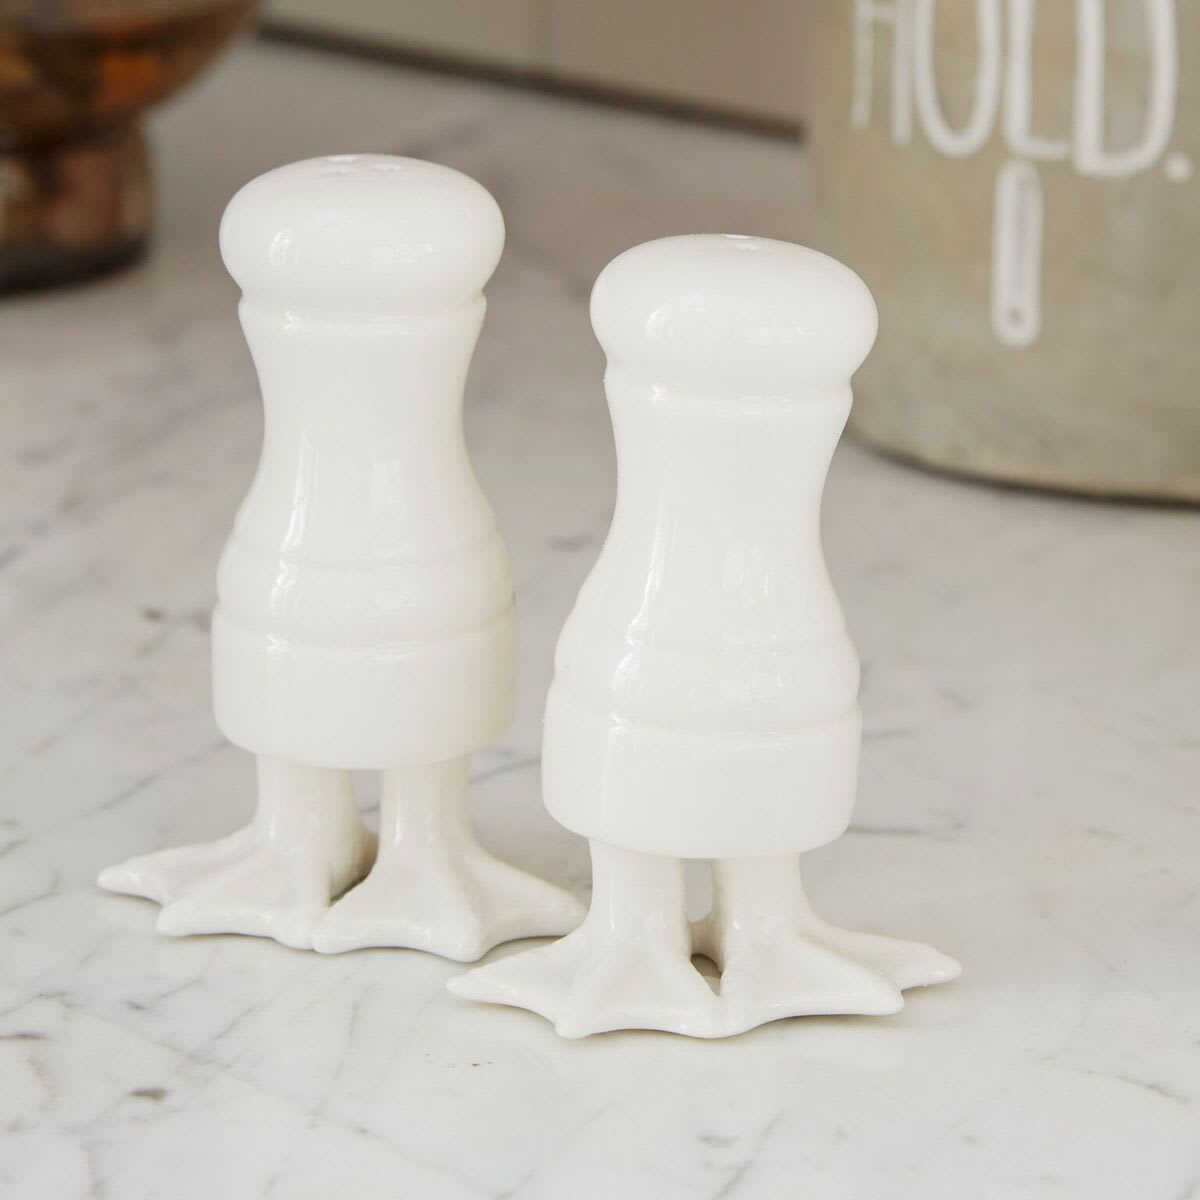 7 Cute Salt And Pepper Shakers That Your Kitchen Must Have